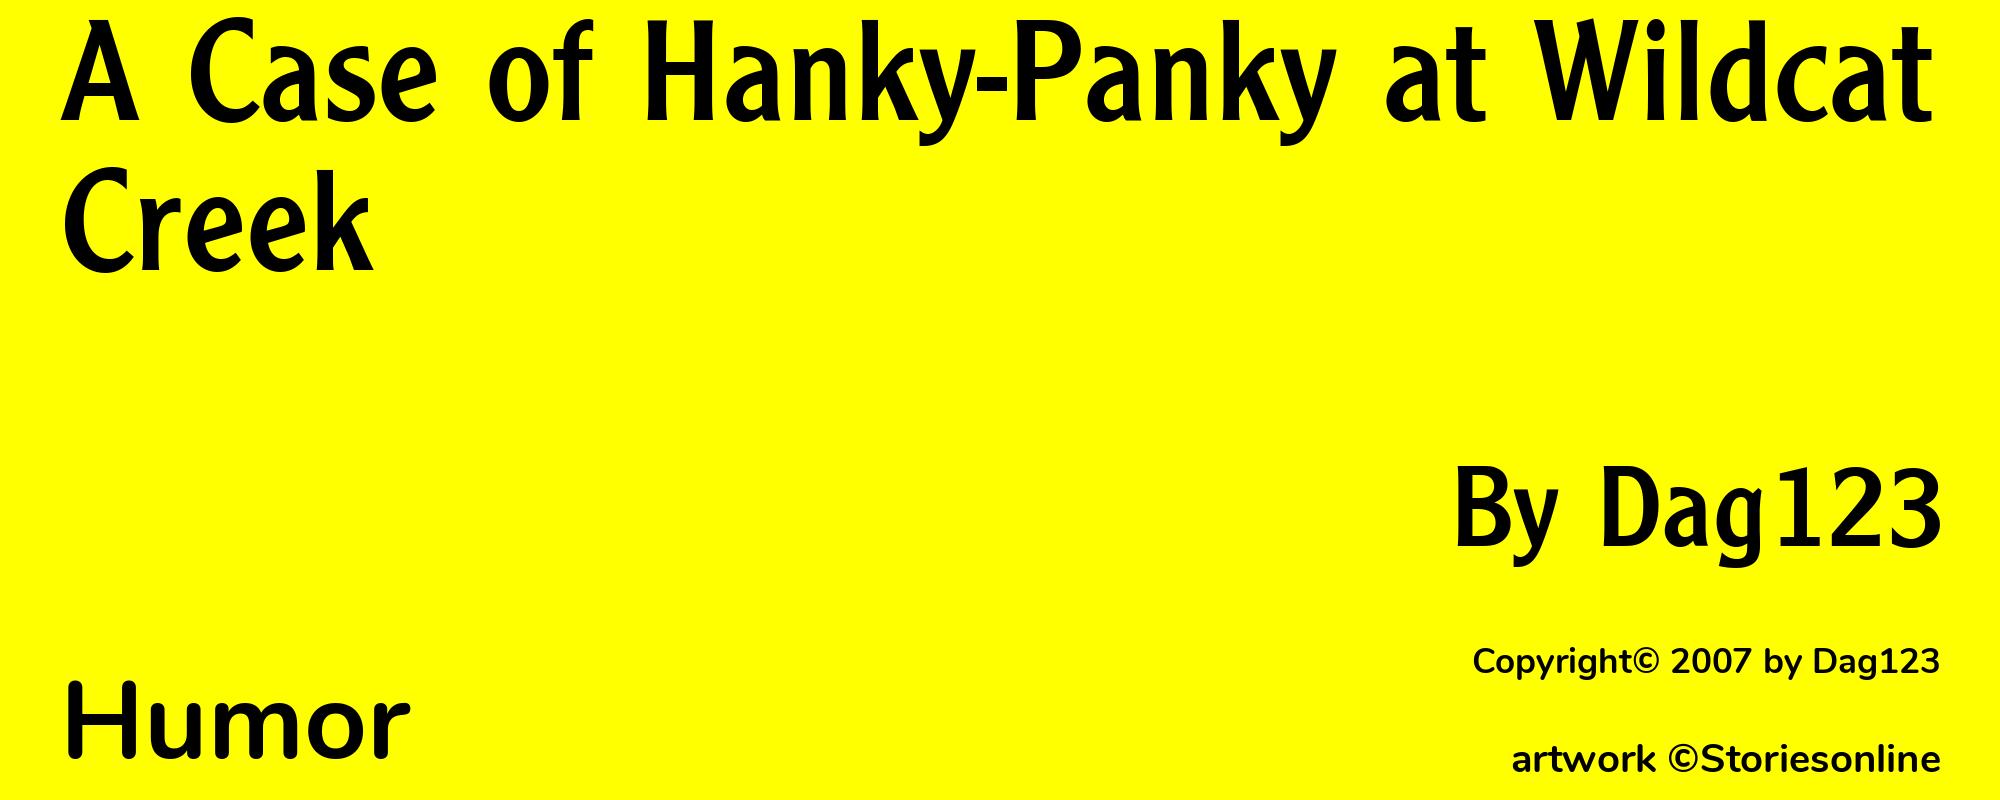 A Case of Hanky-Panky at Wildcat Creek - Cover